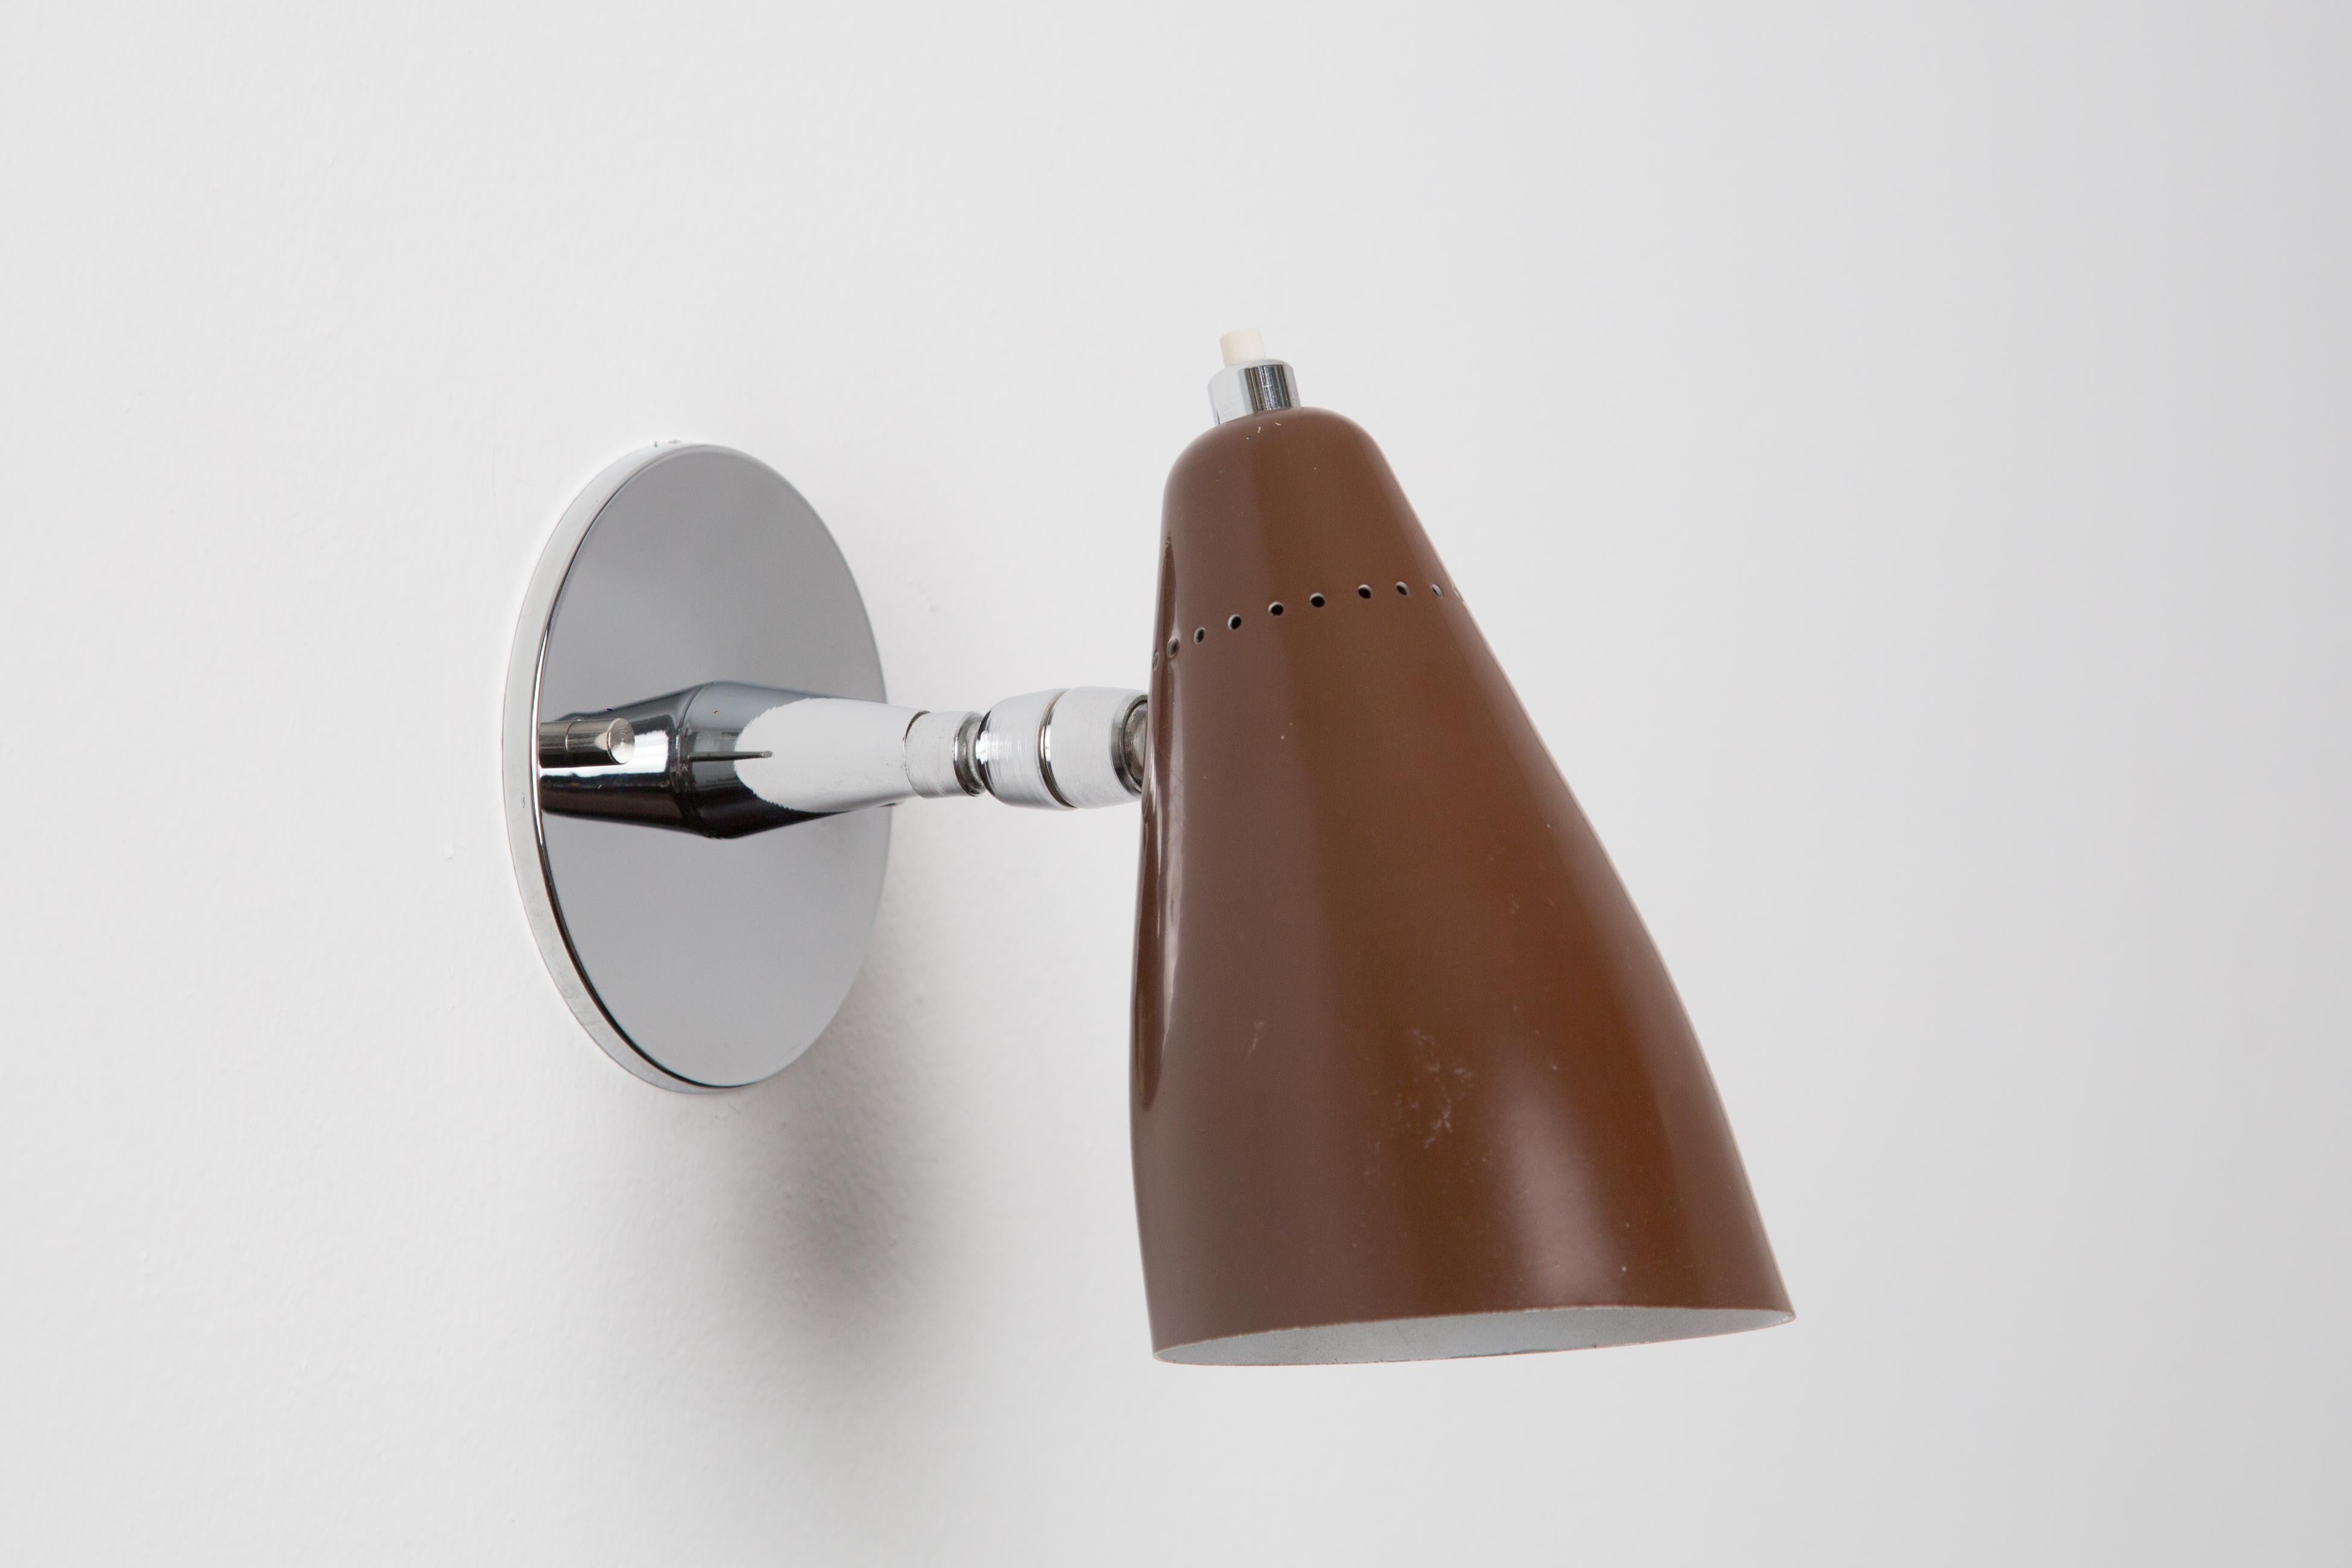 1960s Giuseppe Ostuni Model #101 brown Articulating Sconce for O-Luce. Executed in polished chrome and a brown painted perforated aluminum shade. Sconce pivots up/down and left/right. An incredibly clean and refined design by one of the Italian